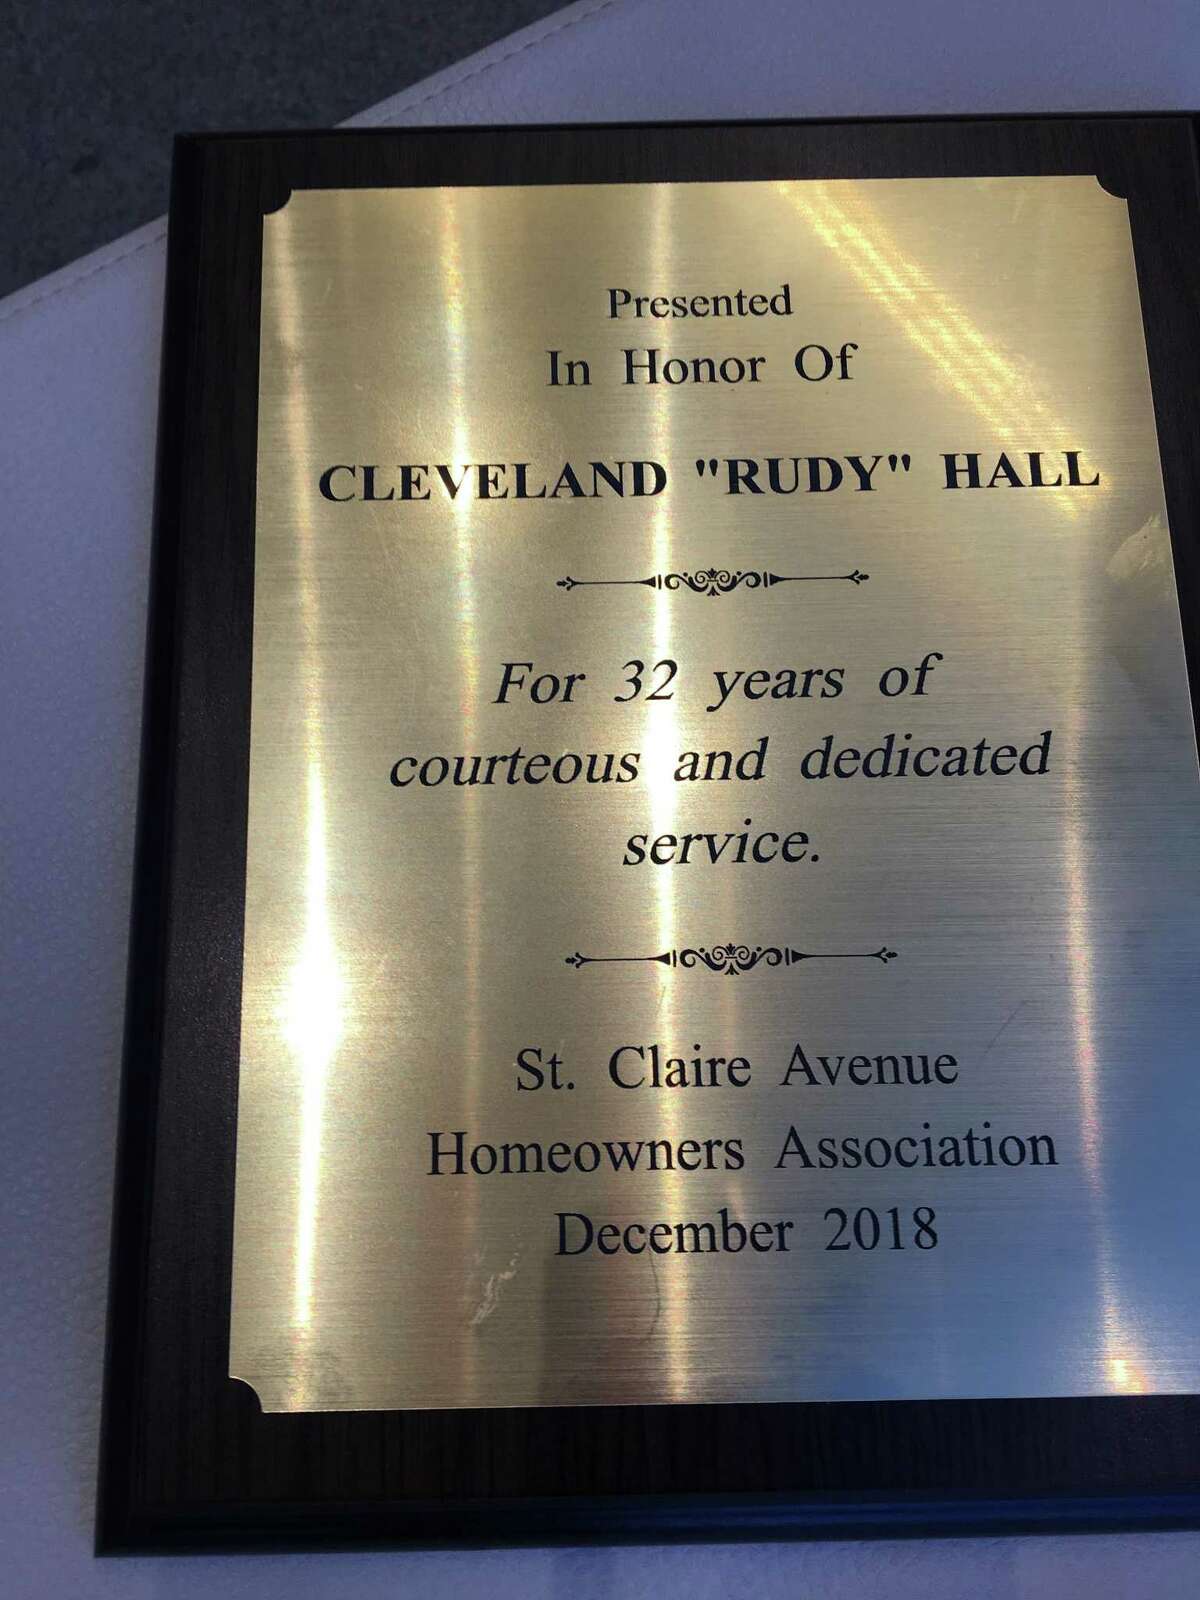 Cleveland Rudy Hall is presented with a plaque commemorating his decades of service at the St. Claire Homeowners Association late last year. He receives the award from Andy Reid the group's president, accompanied by Al Amato, after he was hospitalized for complications from diabetes. Hall died on Jan. 10.